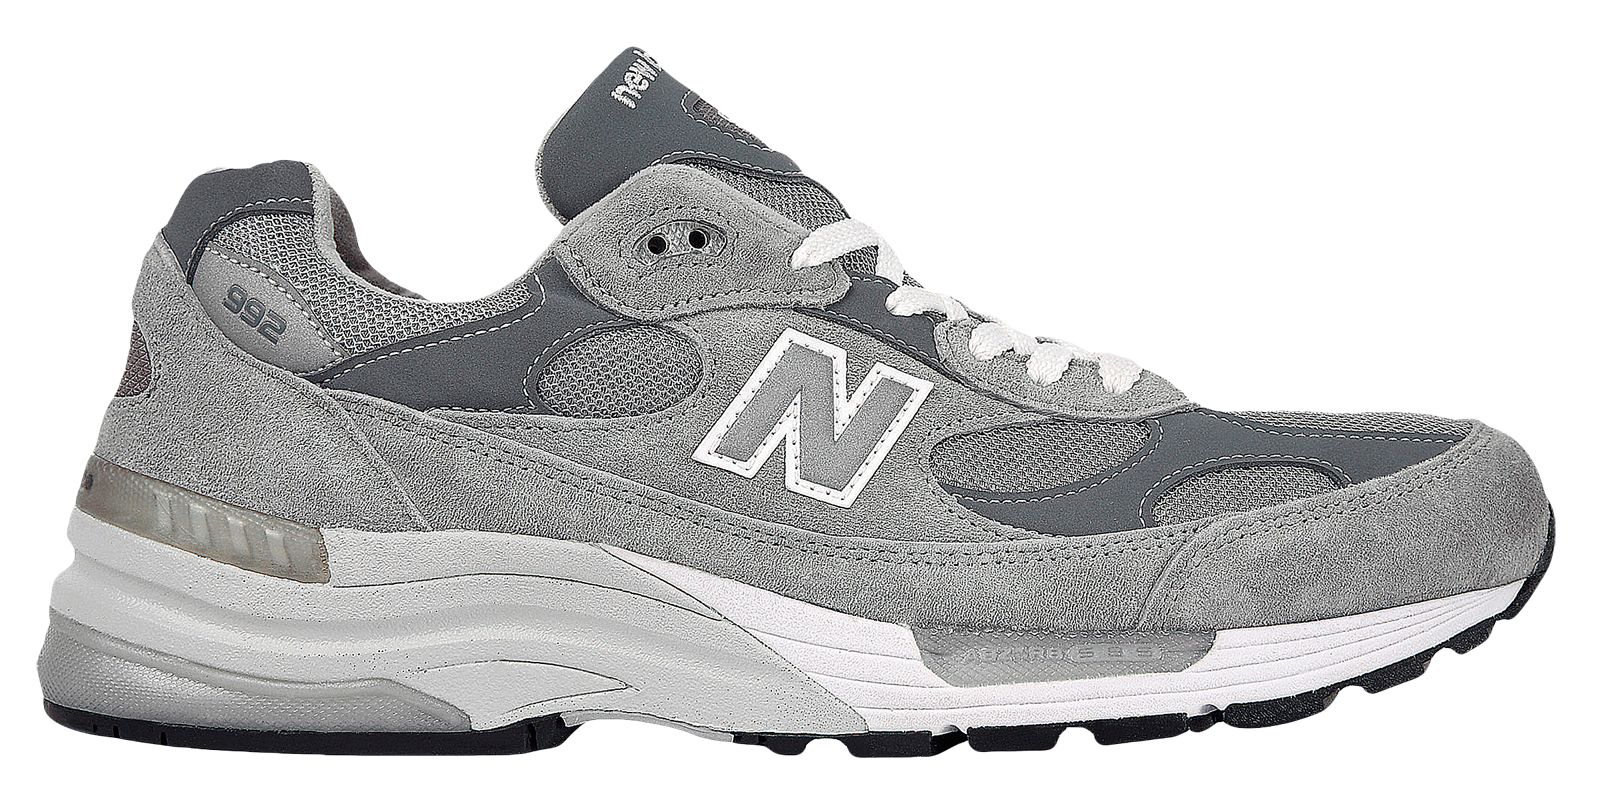 New Balance M992 on Sale - Discounts Up to 25% Off on M992GL at Joe's New  Balance Outlet